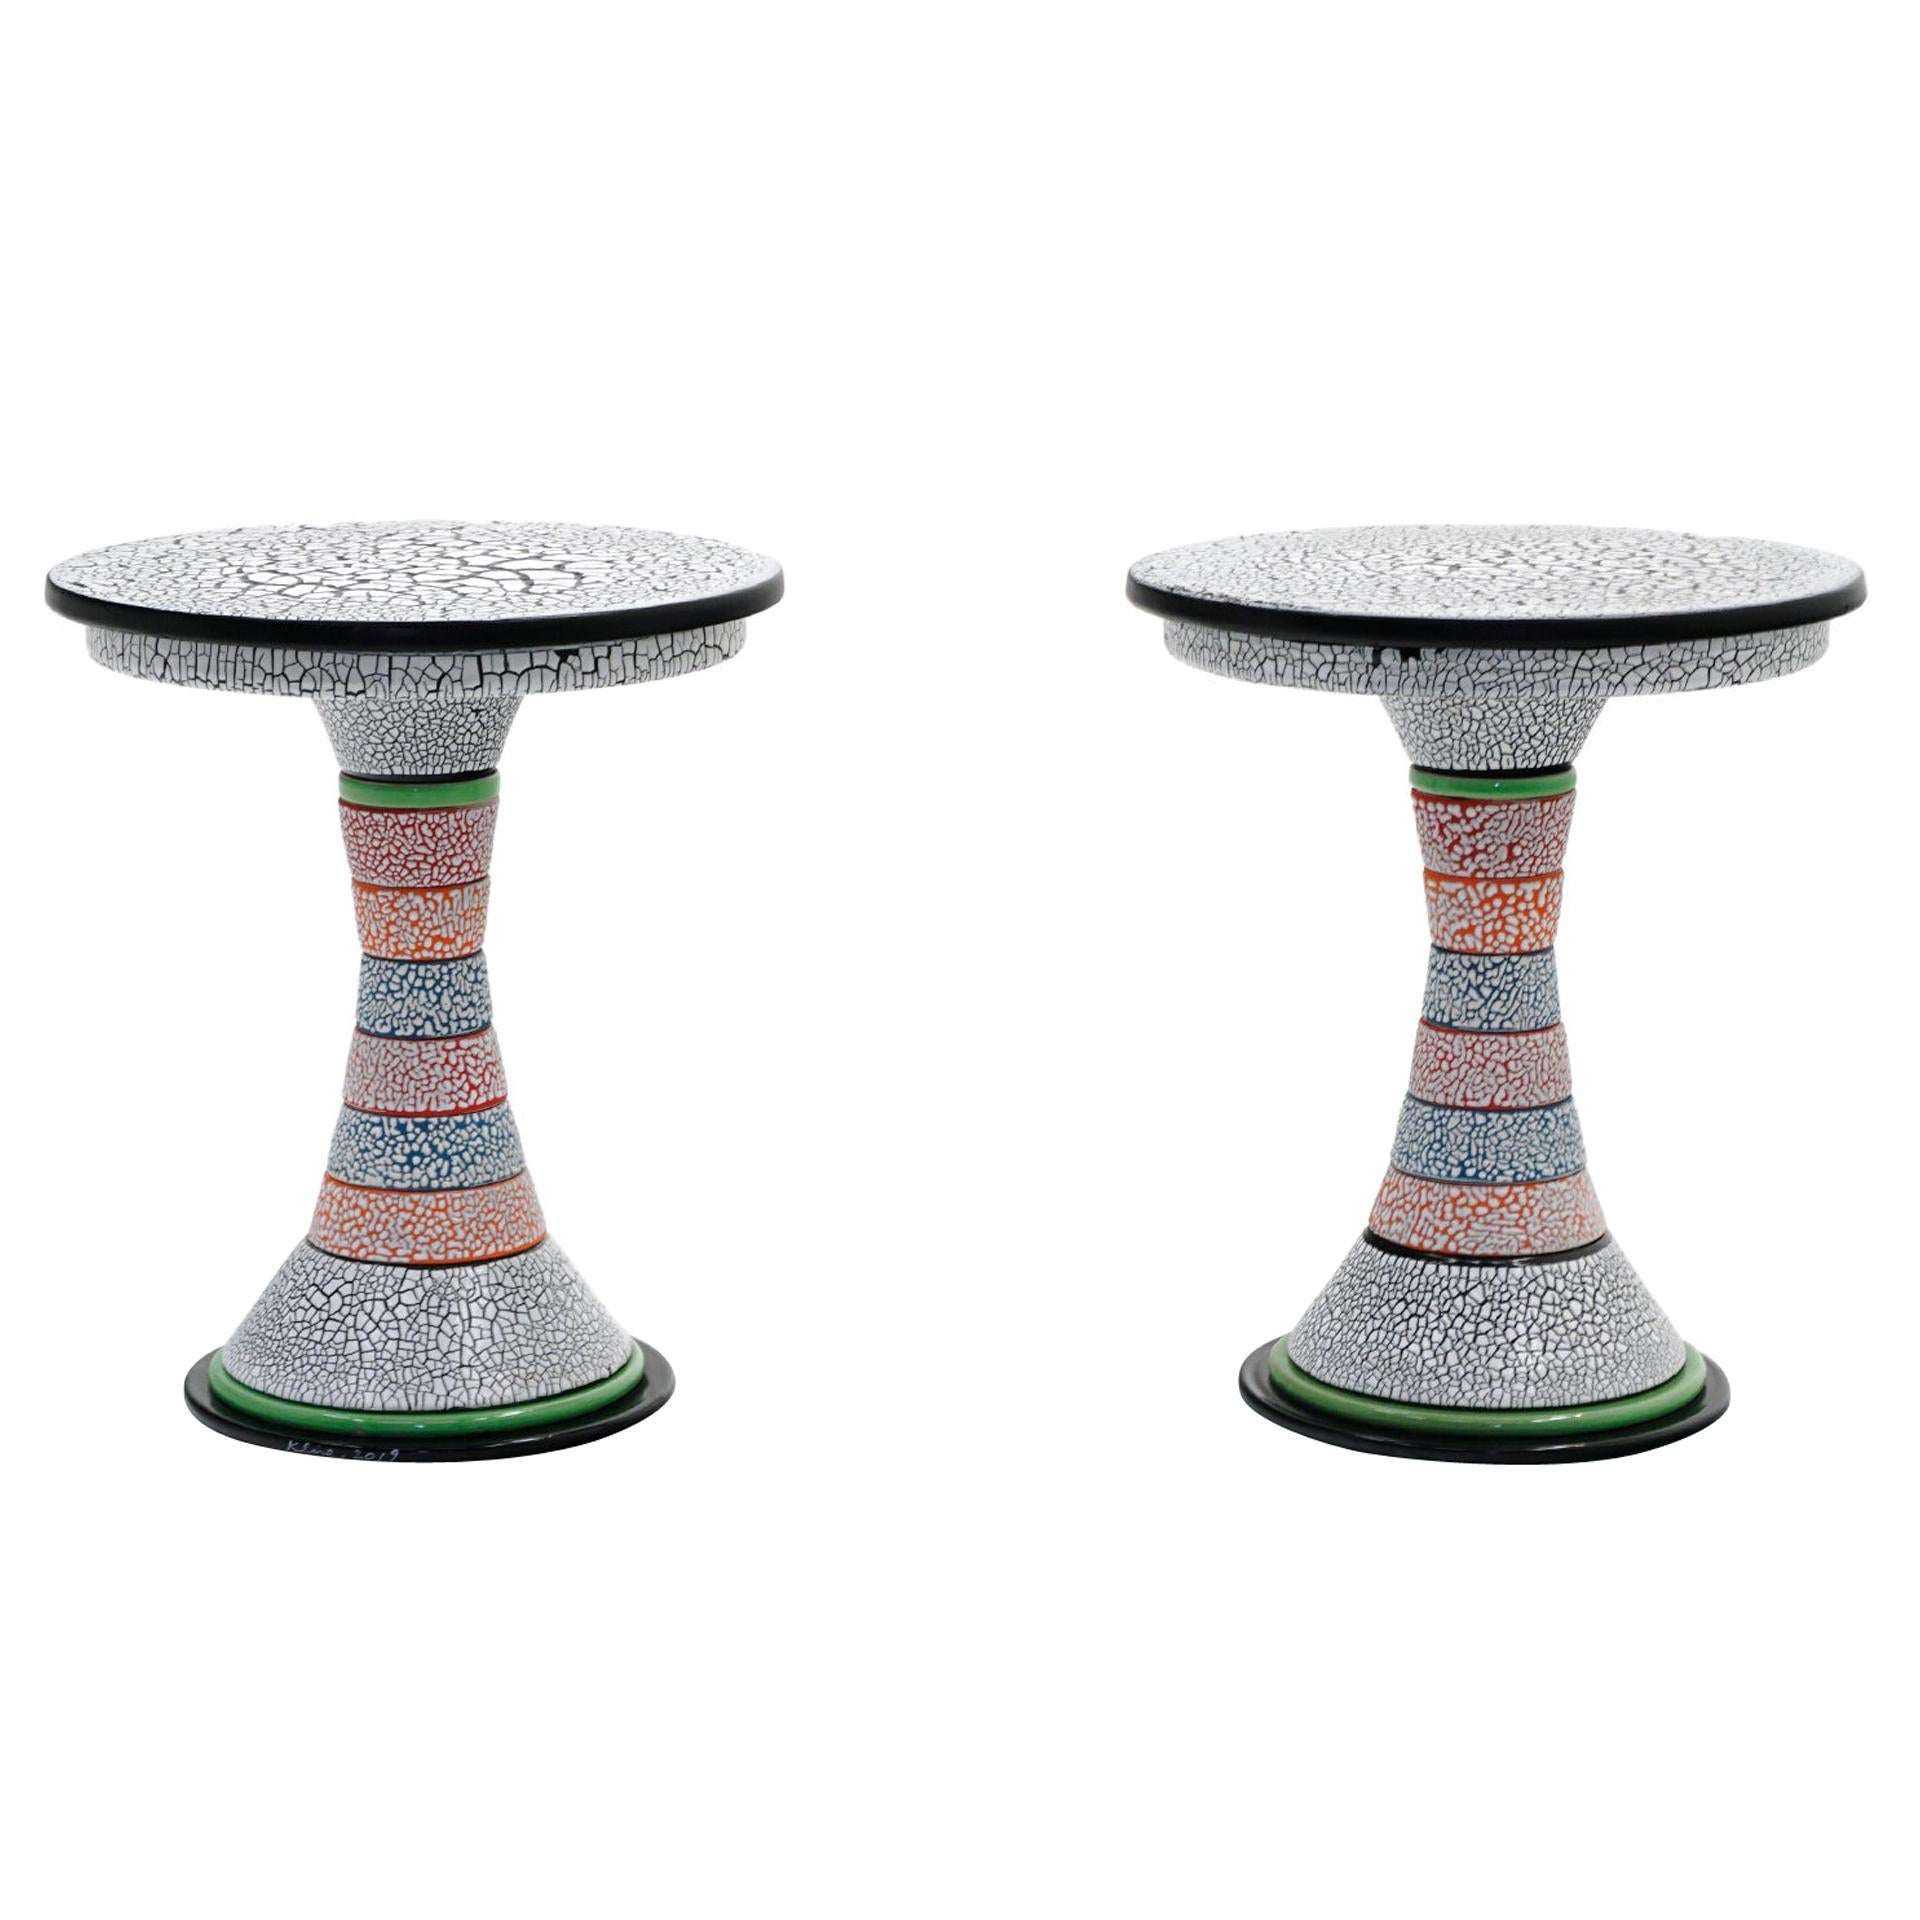 Pair of Side Tables by Amy Kline, One of a Kind, Porcelain Signed and Dated